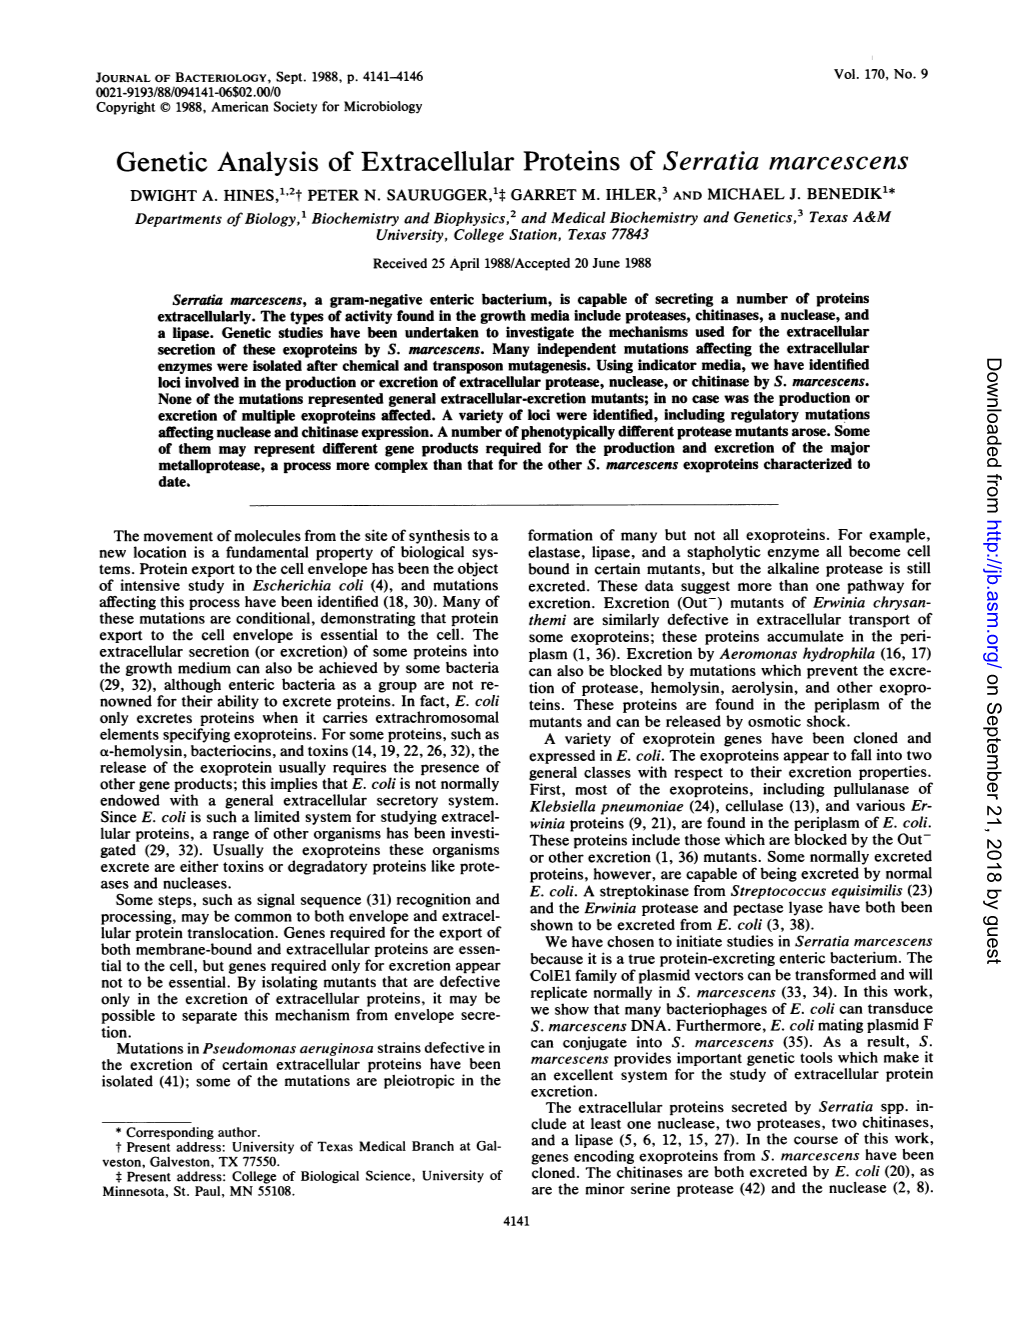 Genetic Analysis of Extracellular Proteins of Serratia Marcescens DWIGHT A